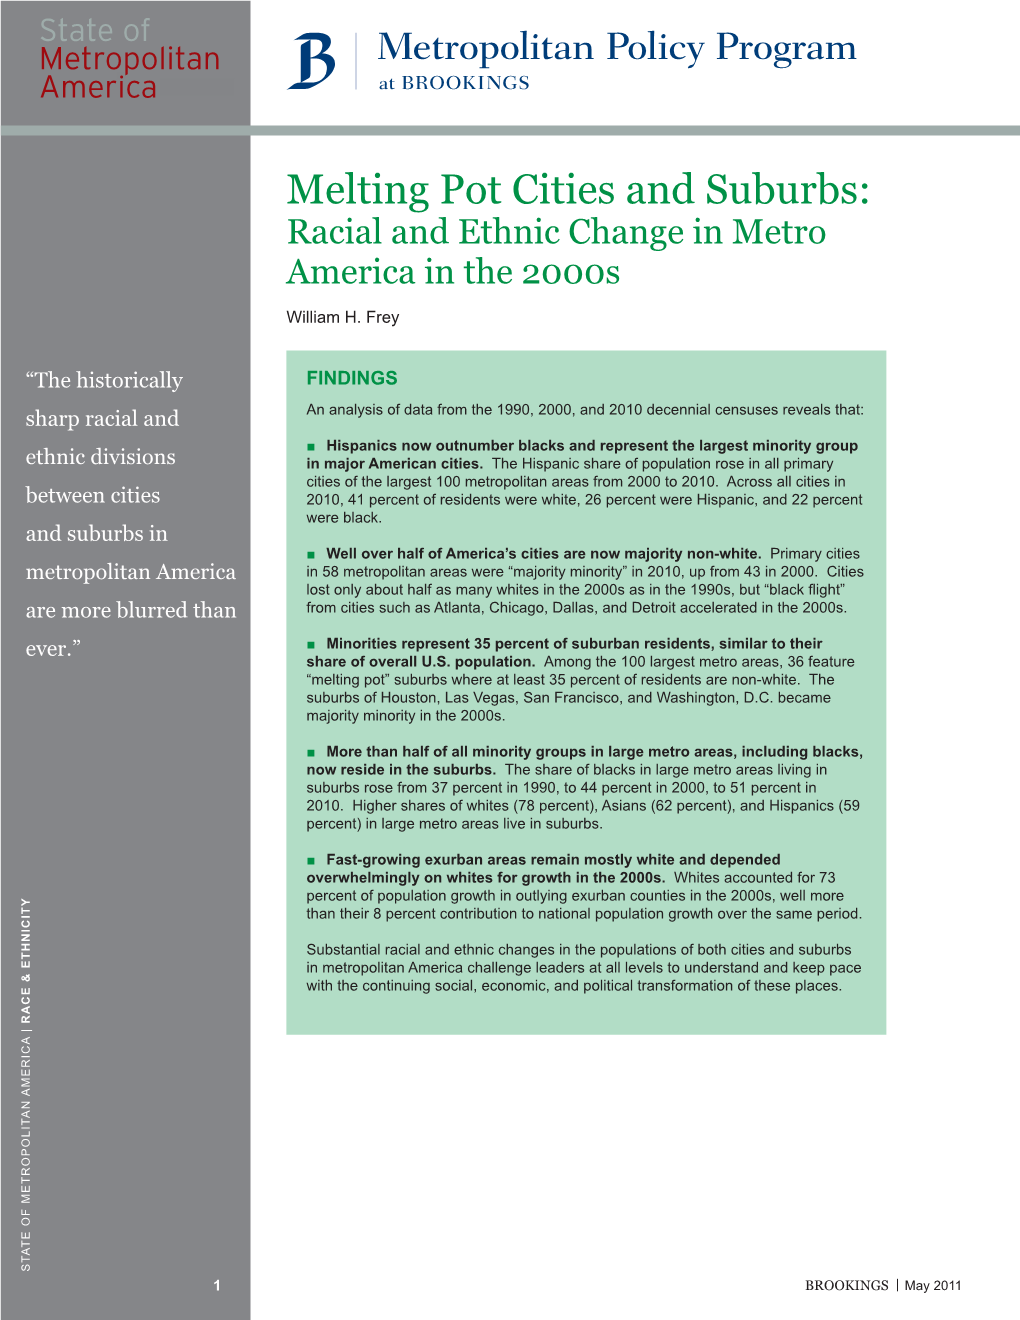 Melting Pot Cities and Suburbs: Racial and Ethnic Change in Metro America in the 2000S